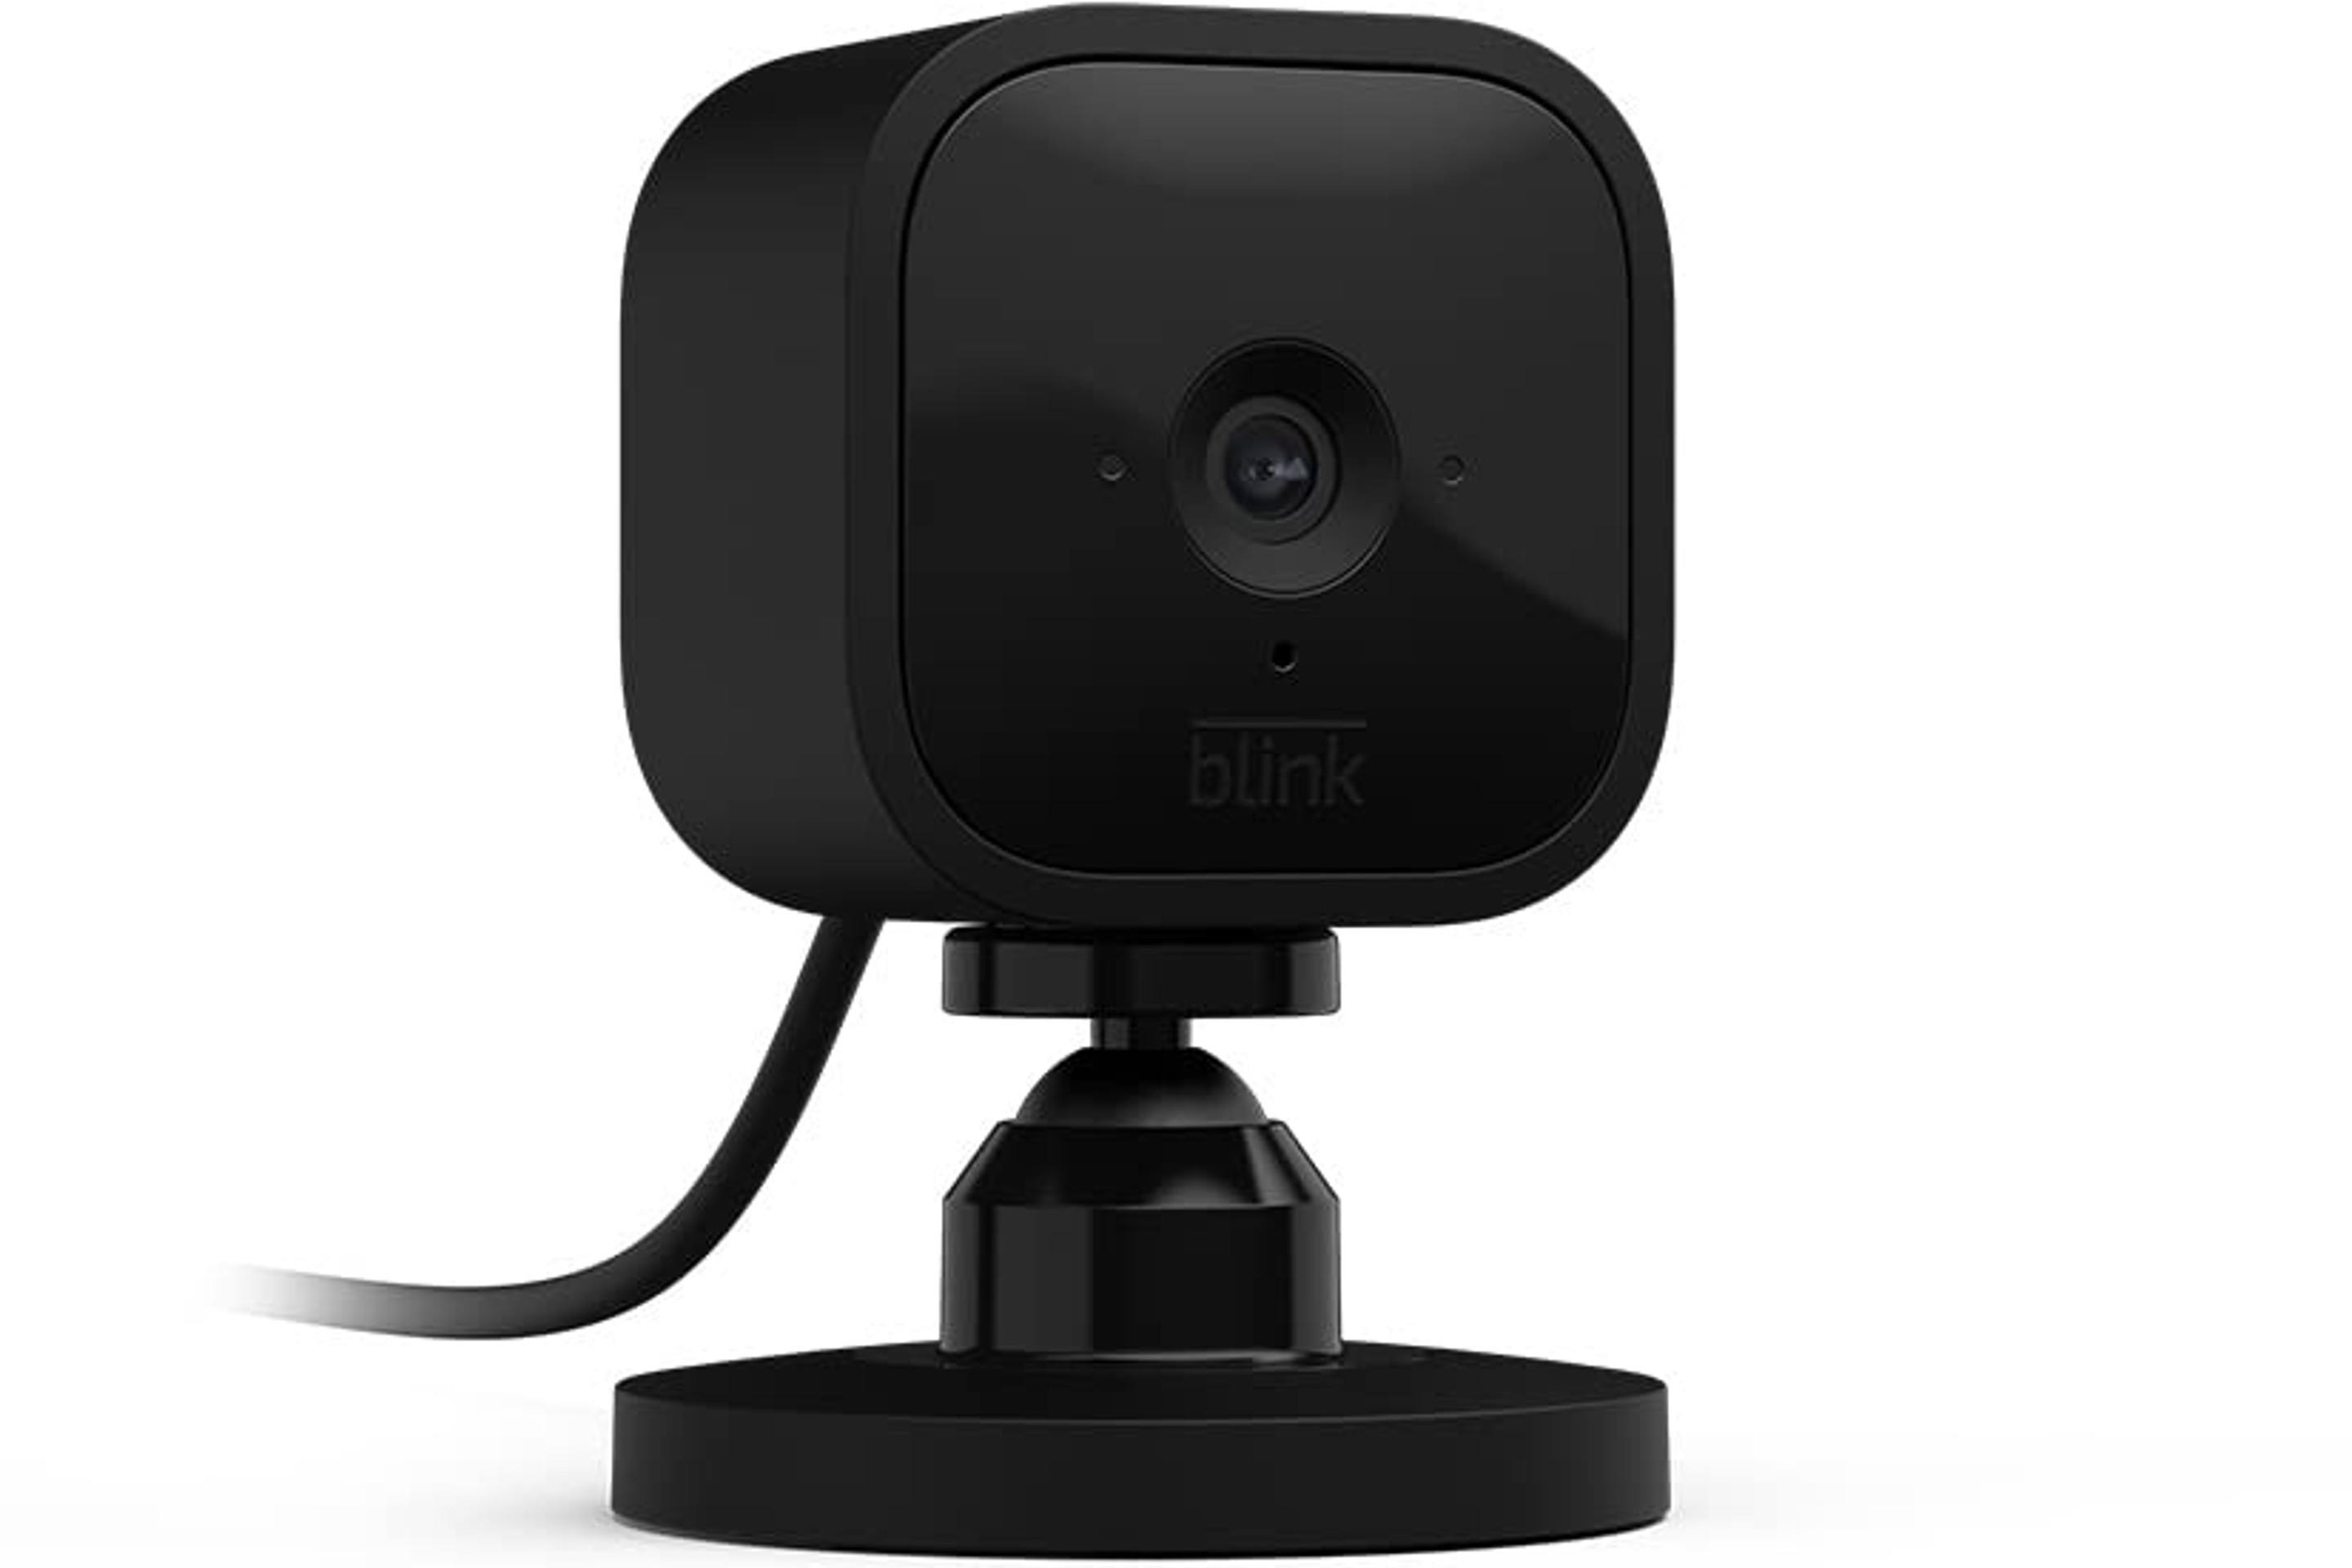 Save 30% on The Blink Mini